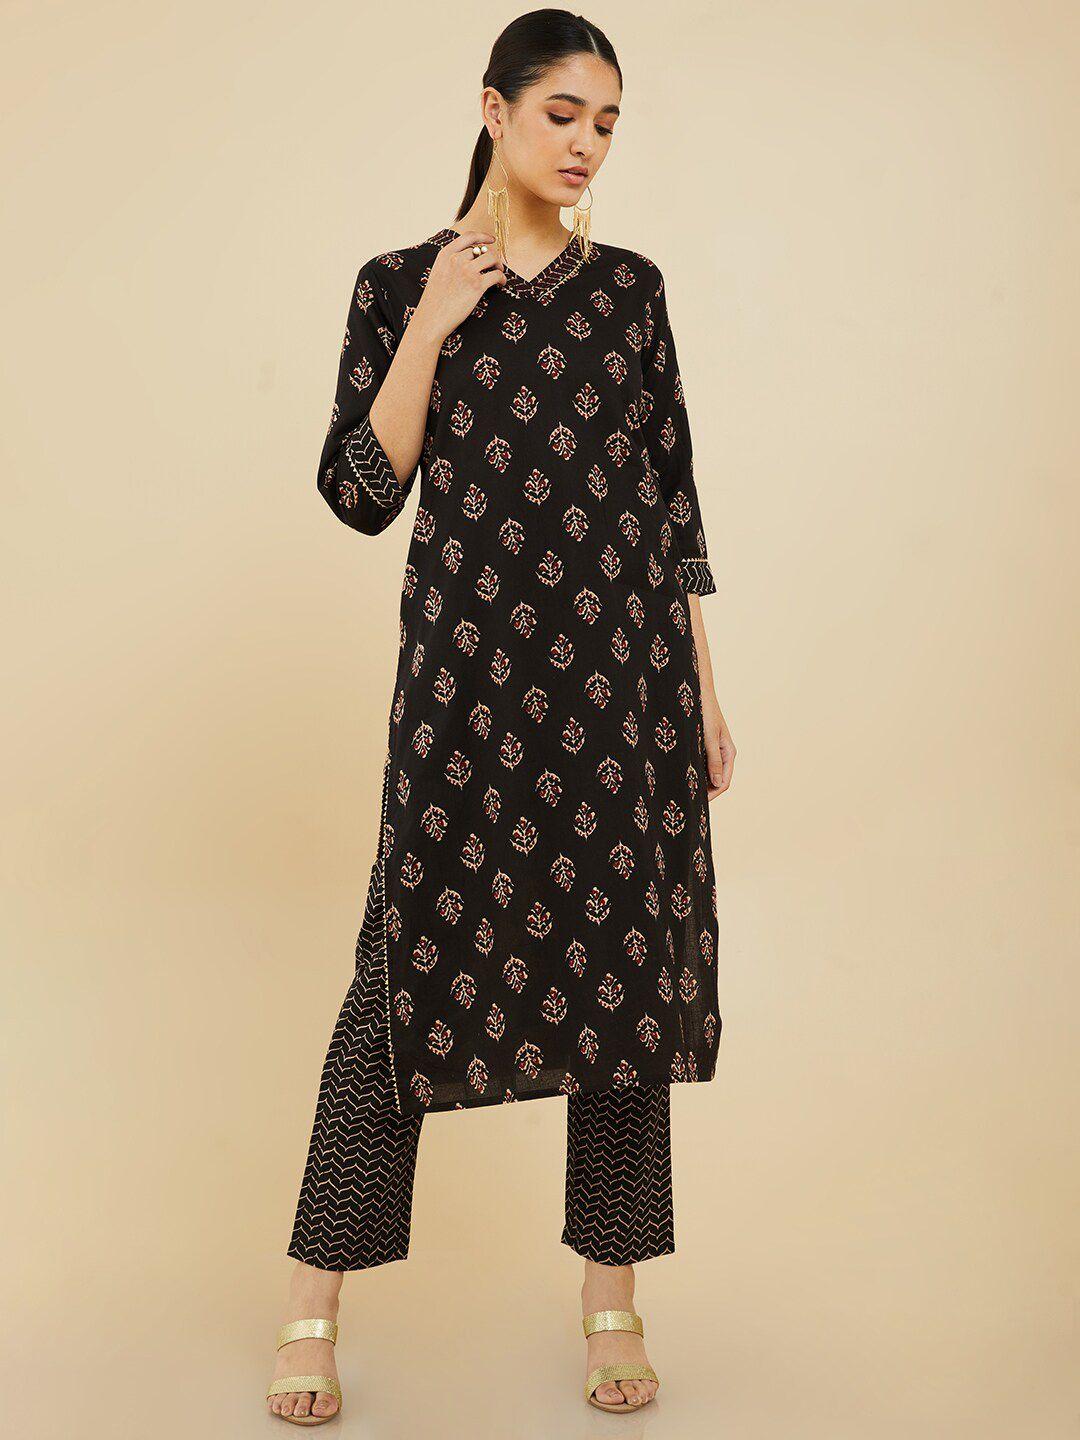 soch floral printed cotton kurta with trousers